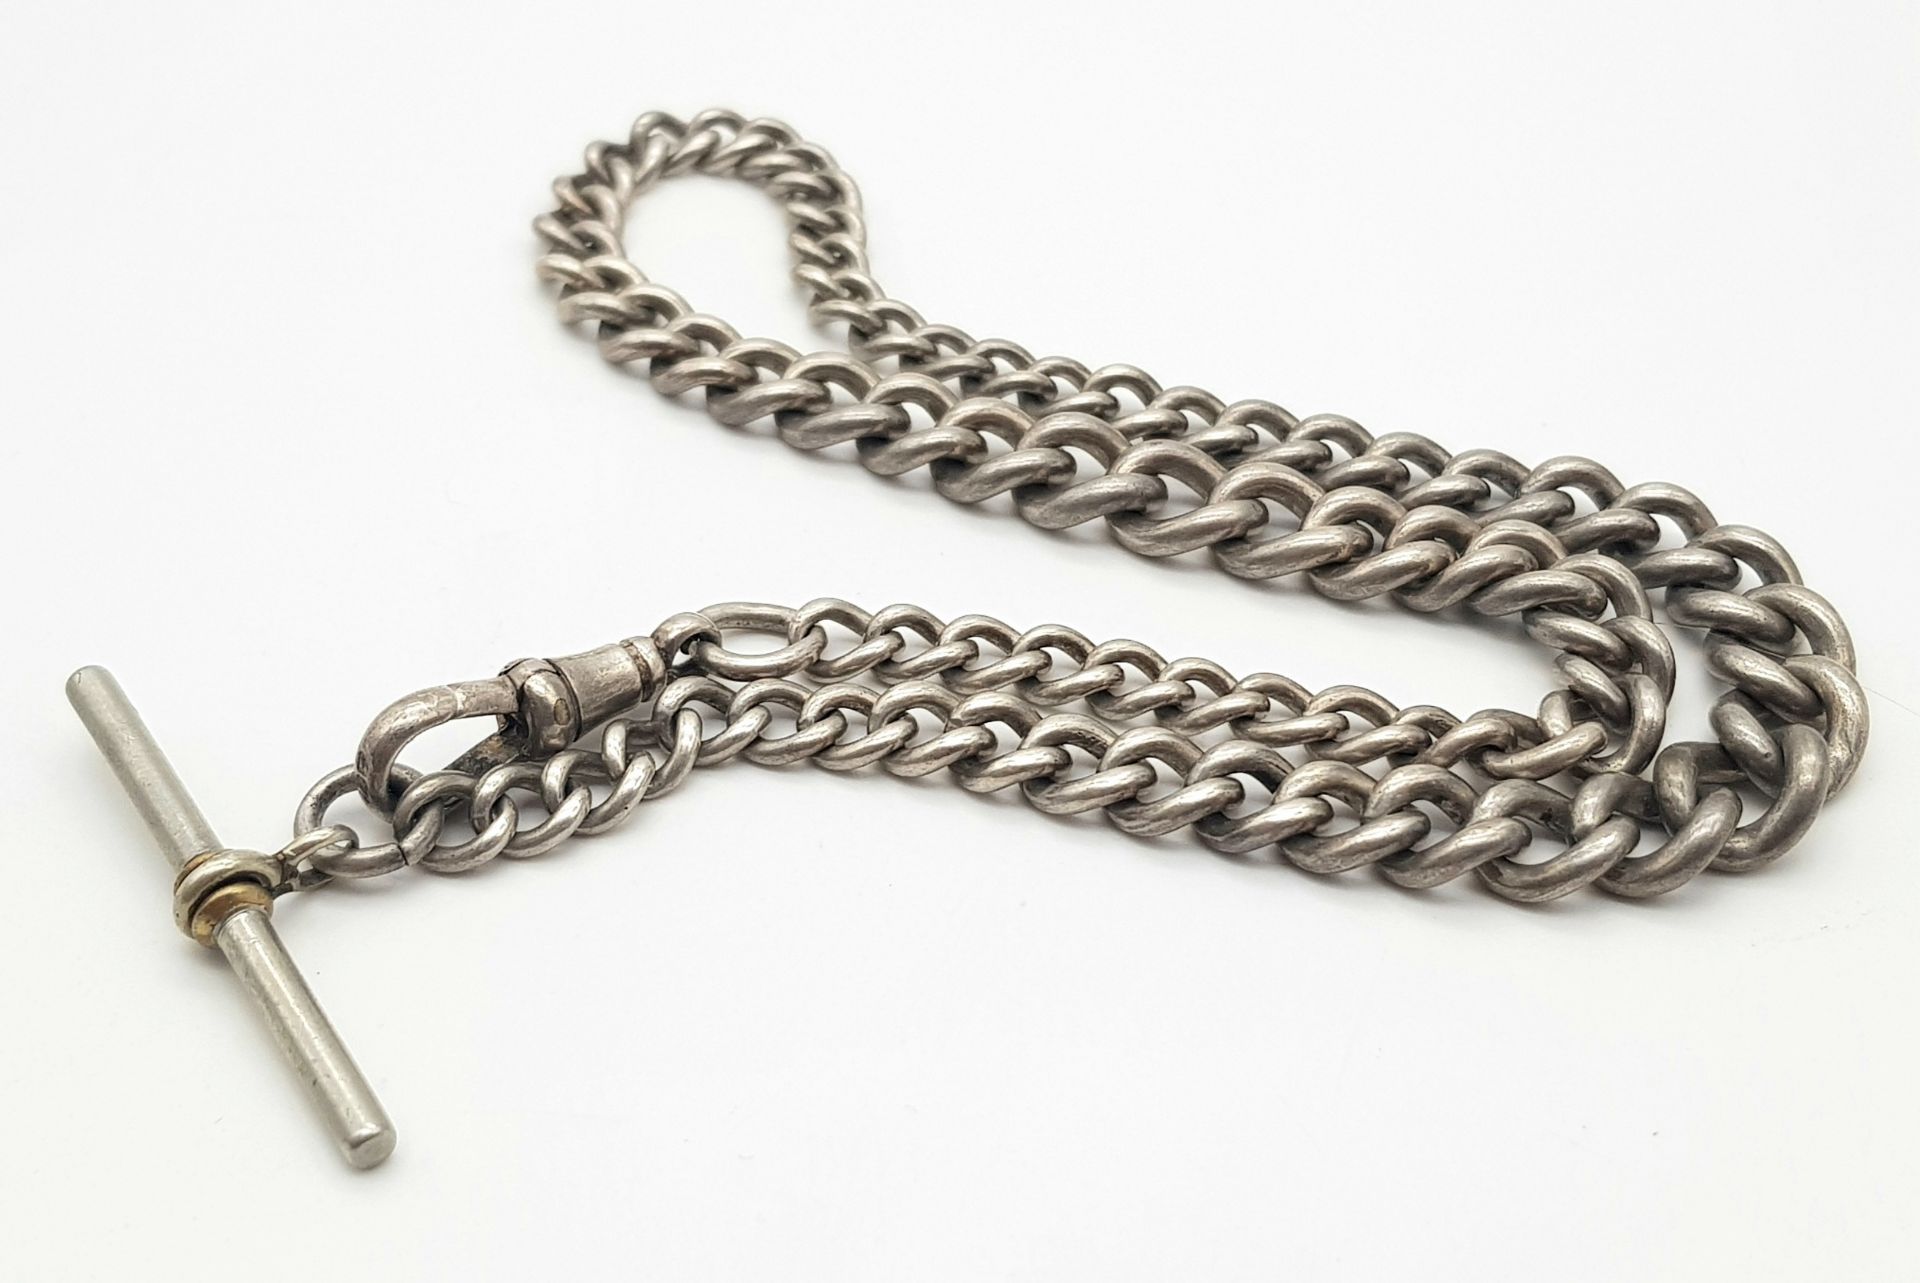 A Vintage/Antique Sterling Silver Albert Chain - Faded Hallmarks. 36cm length. 42g - Image 3 of 4